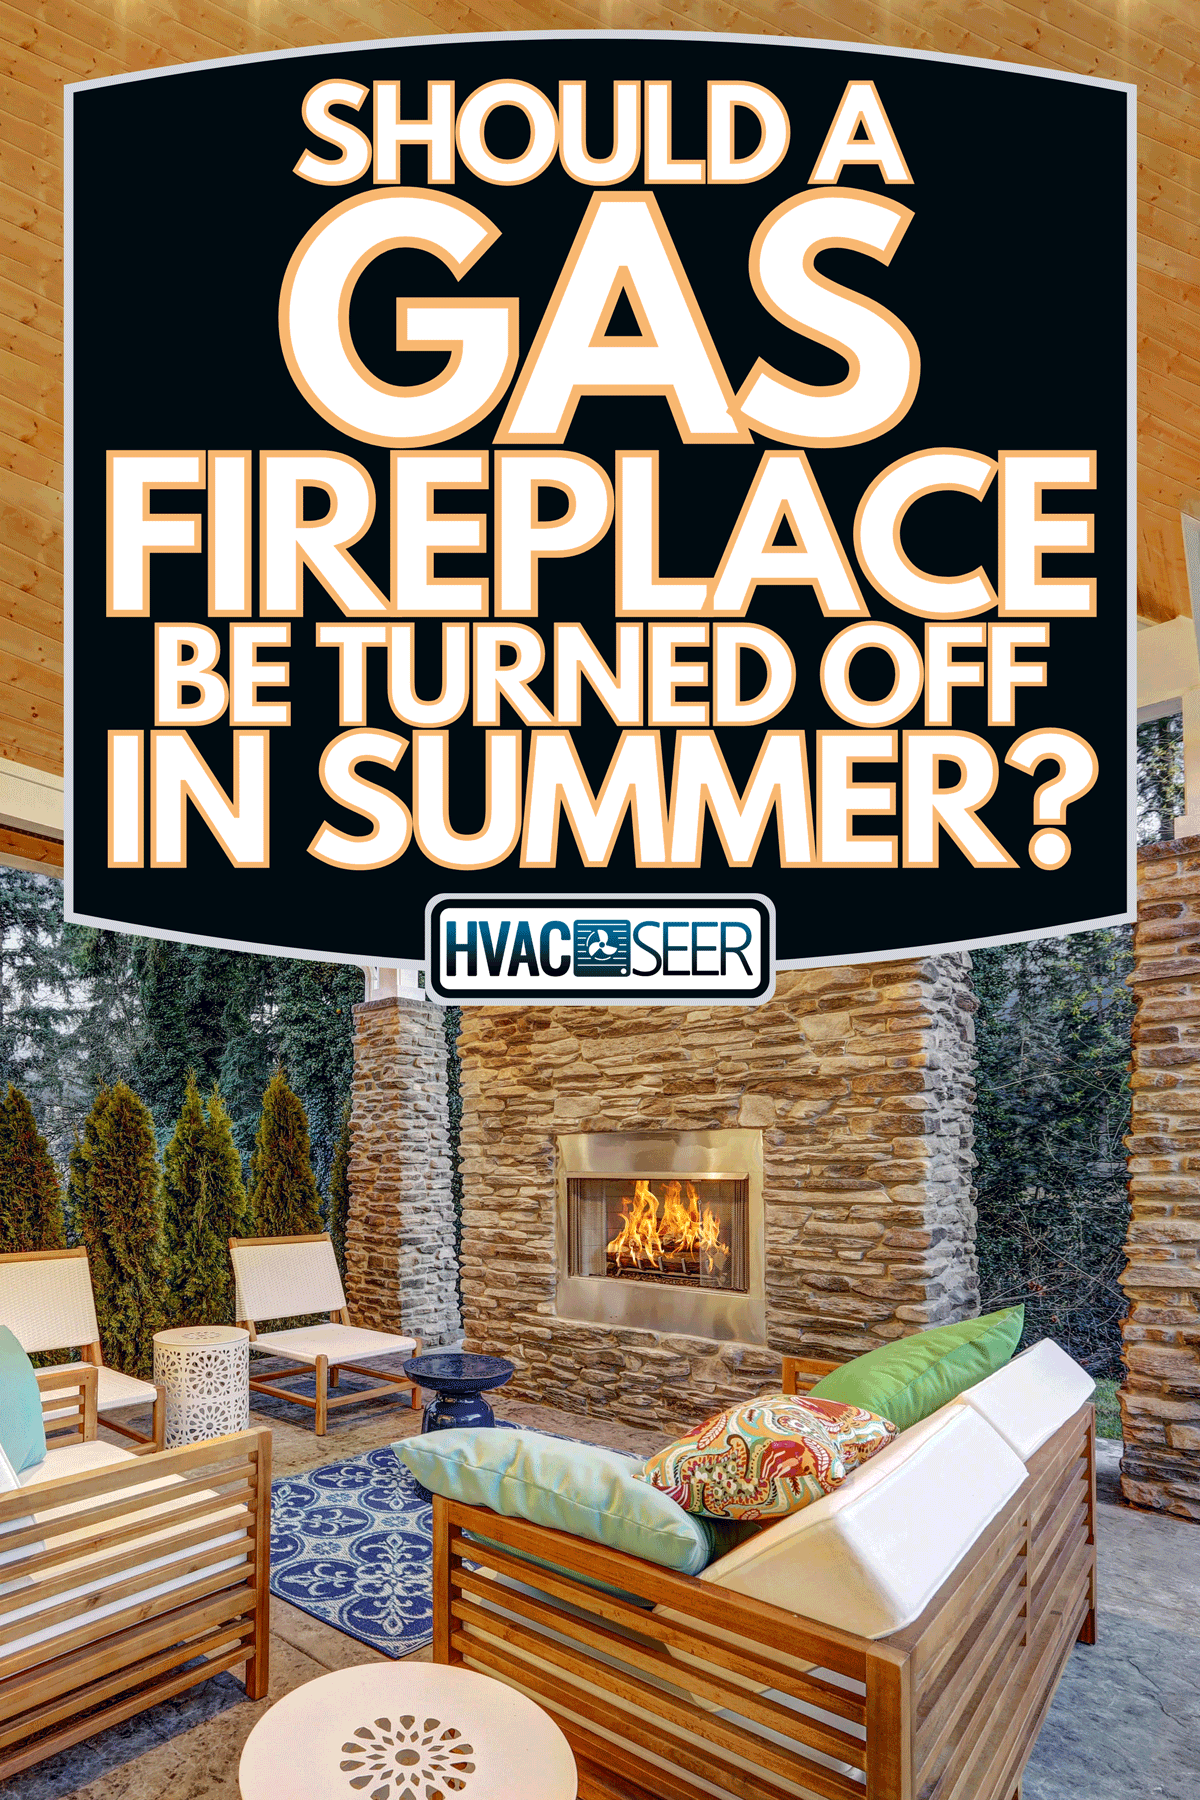 Chic covered back patio with built in gas fireplace, Should A Gas Fireplace Be Turned Off in Summer?